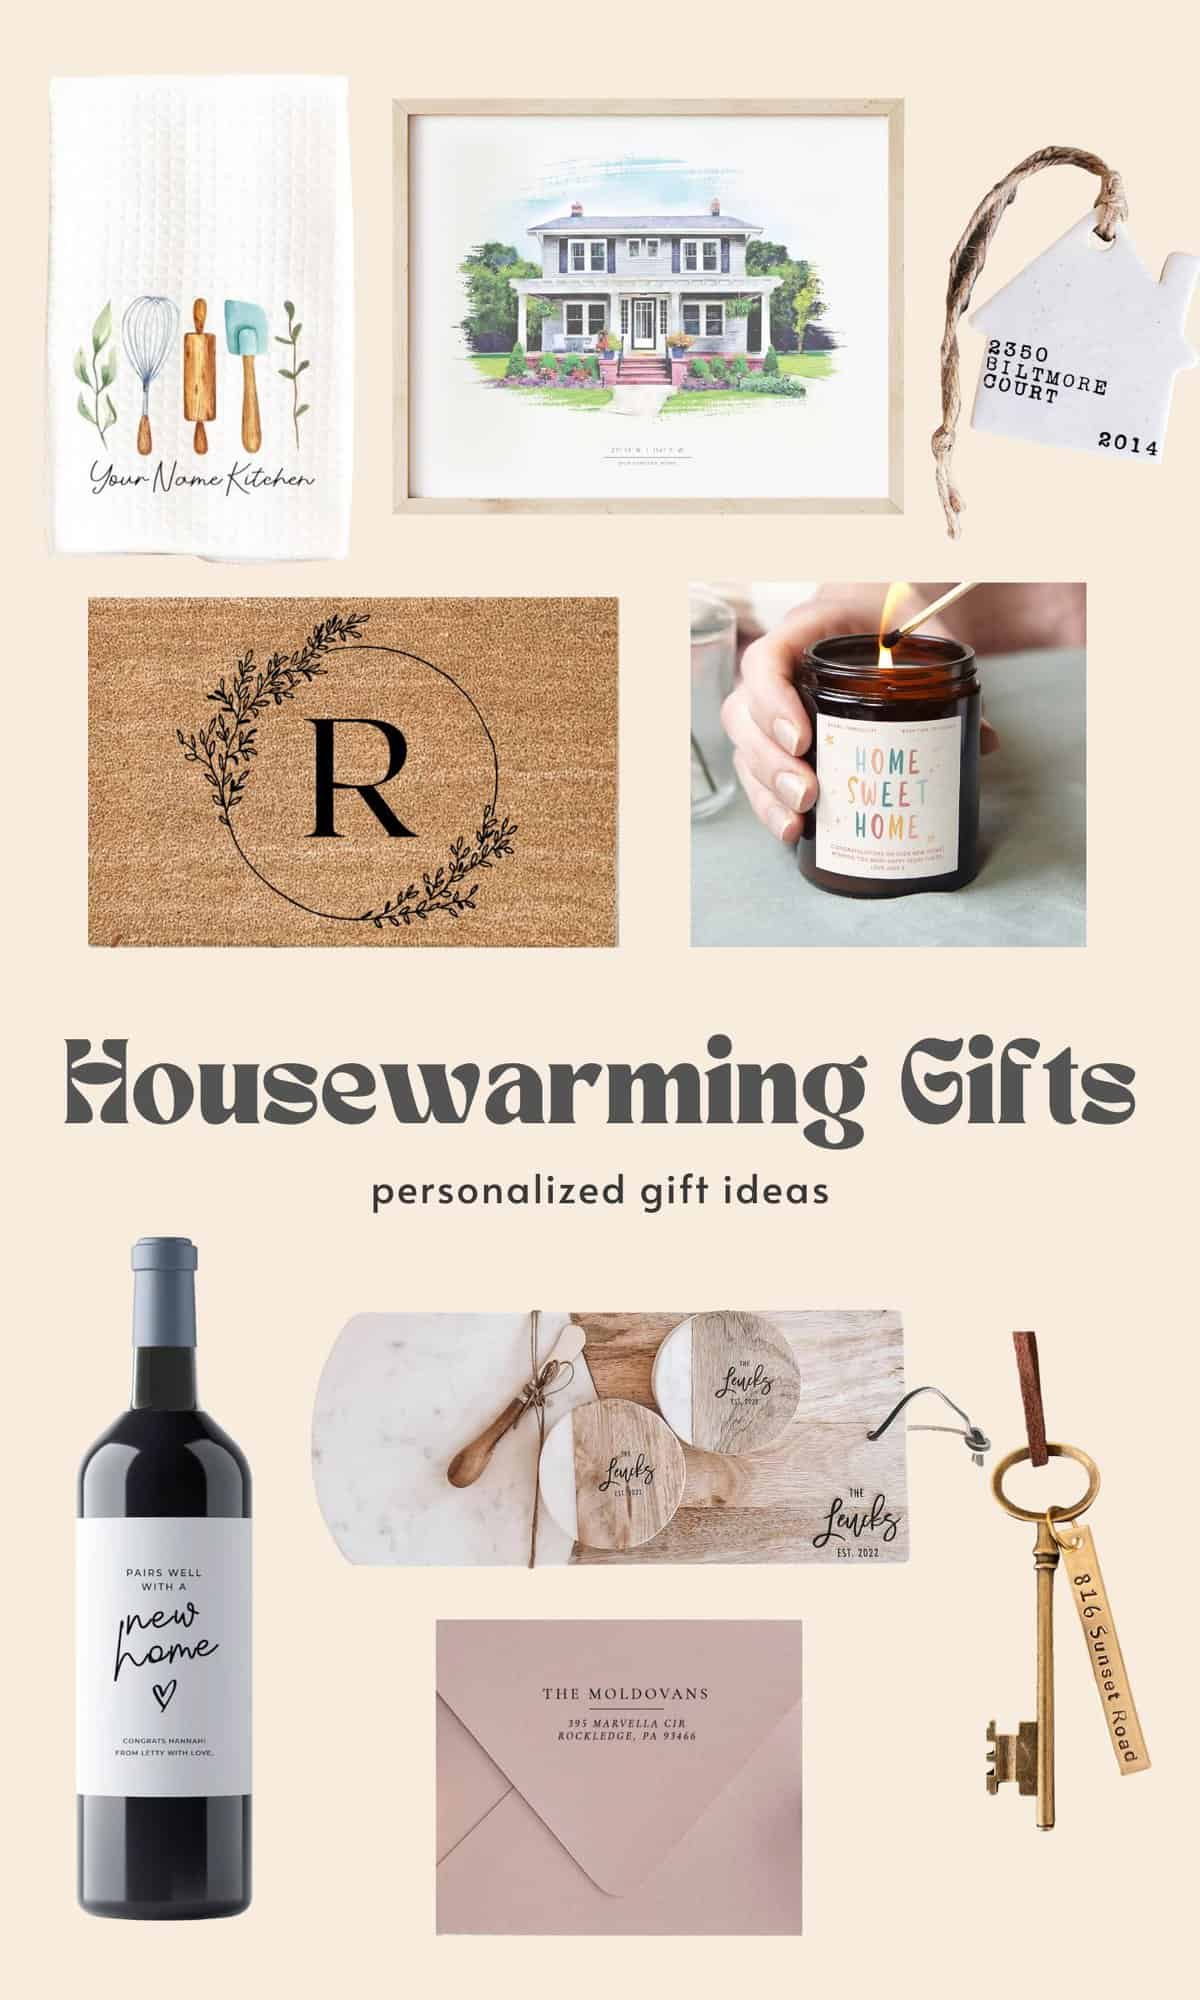 Home Sweet Home, House Warming Gifts, New Home Gift Ideas